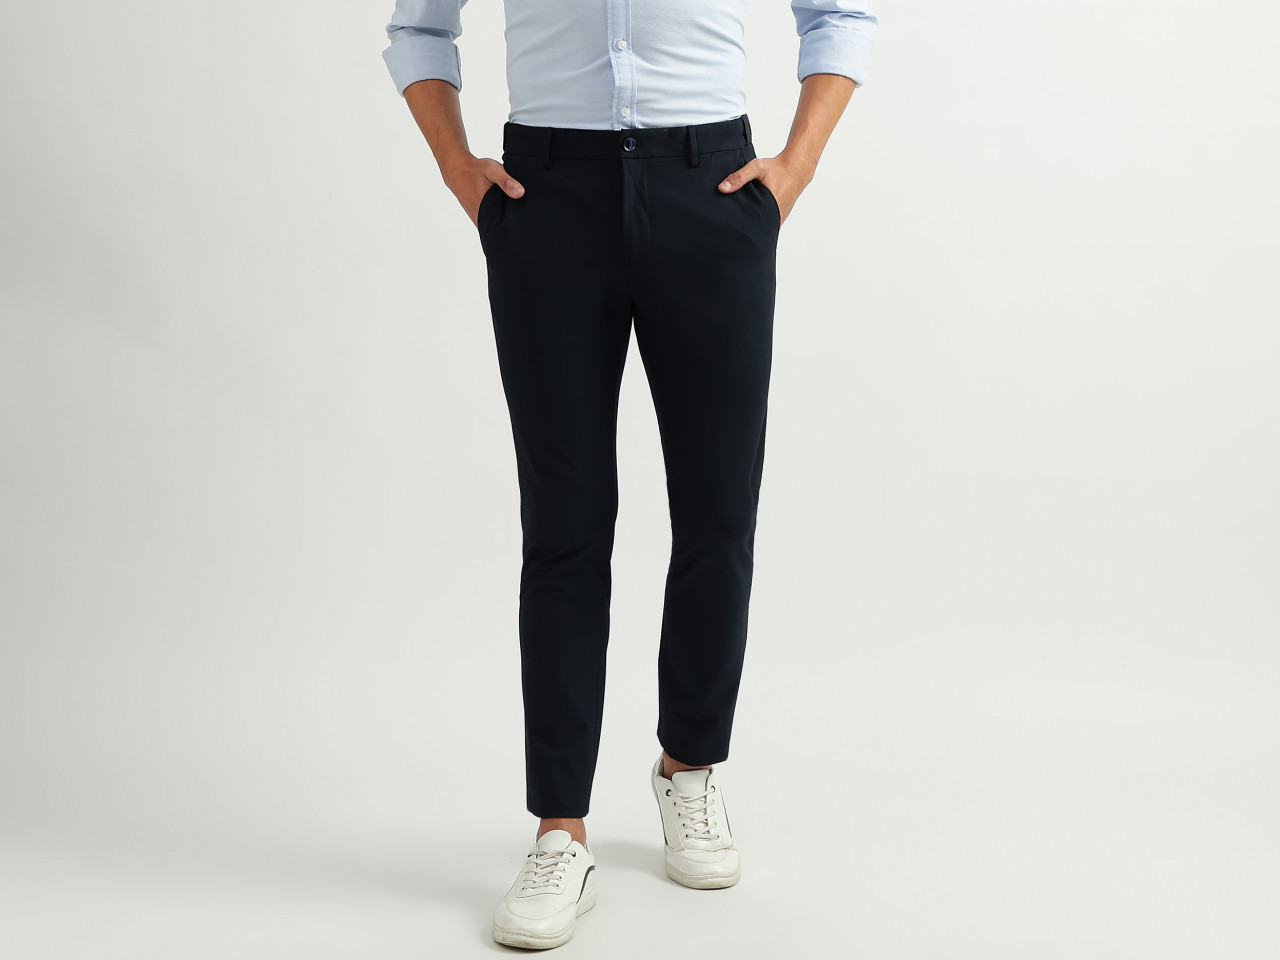 Buy Black Trousers & Pants for Men by MCHENRY Online | Ajio.com